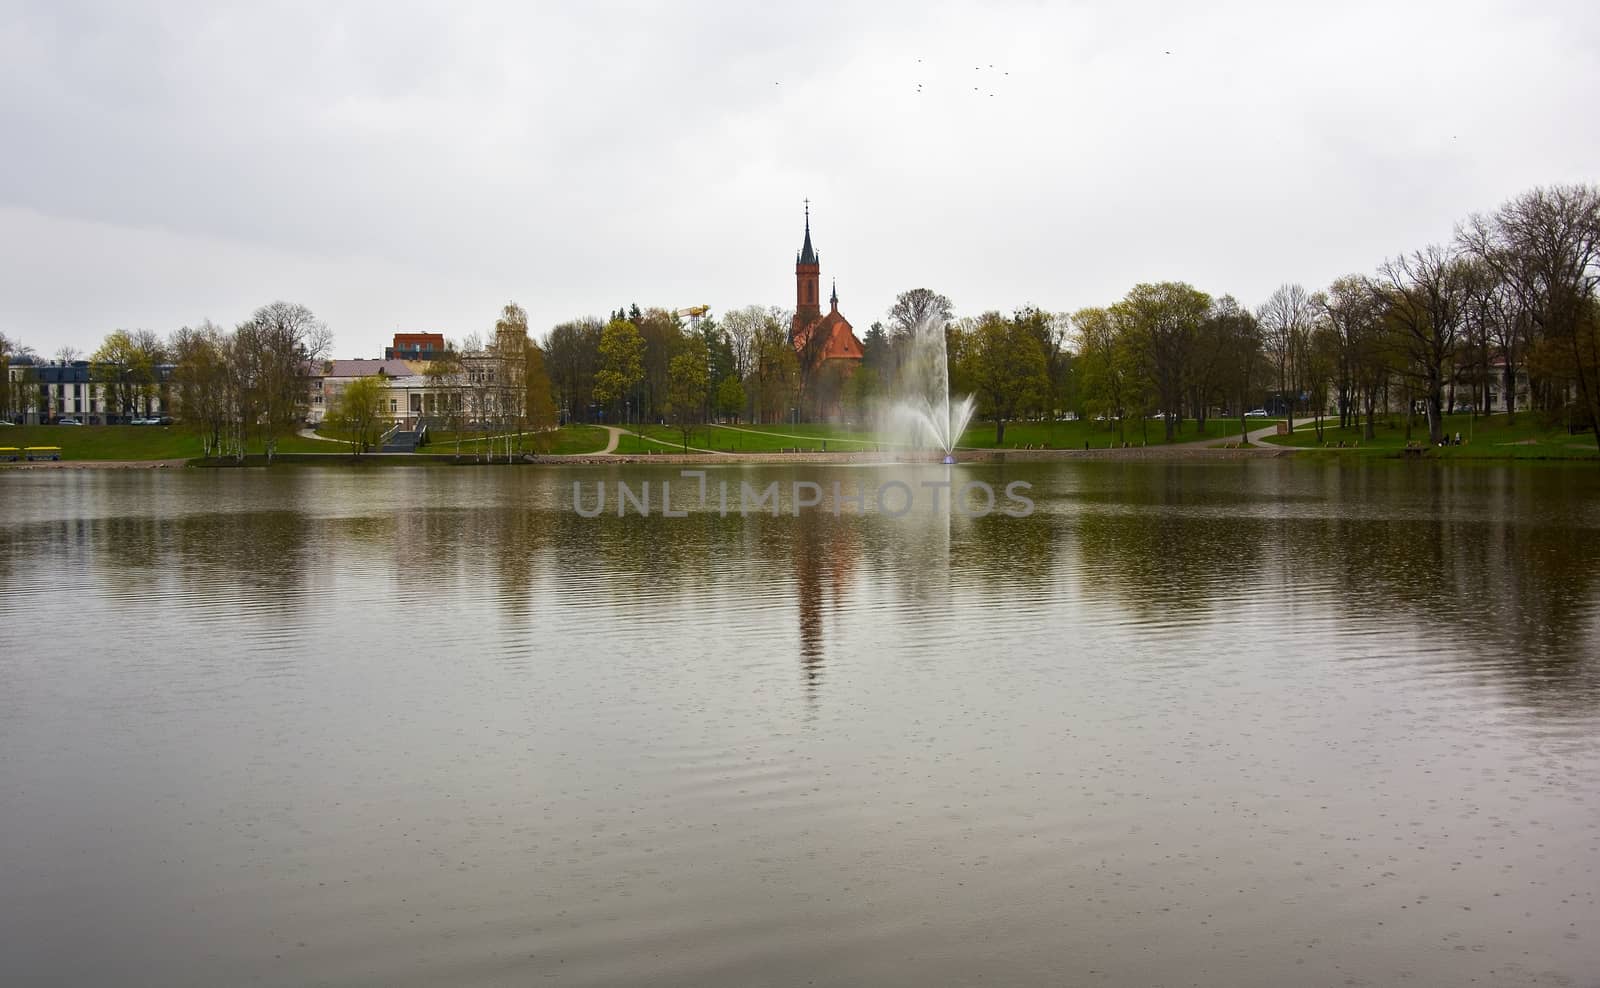 The photo was taken in the town of Druskininkai Lithuania in a rainy day